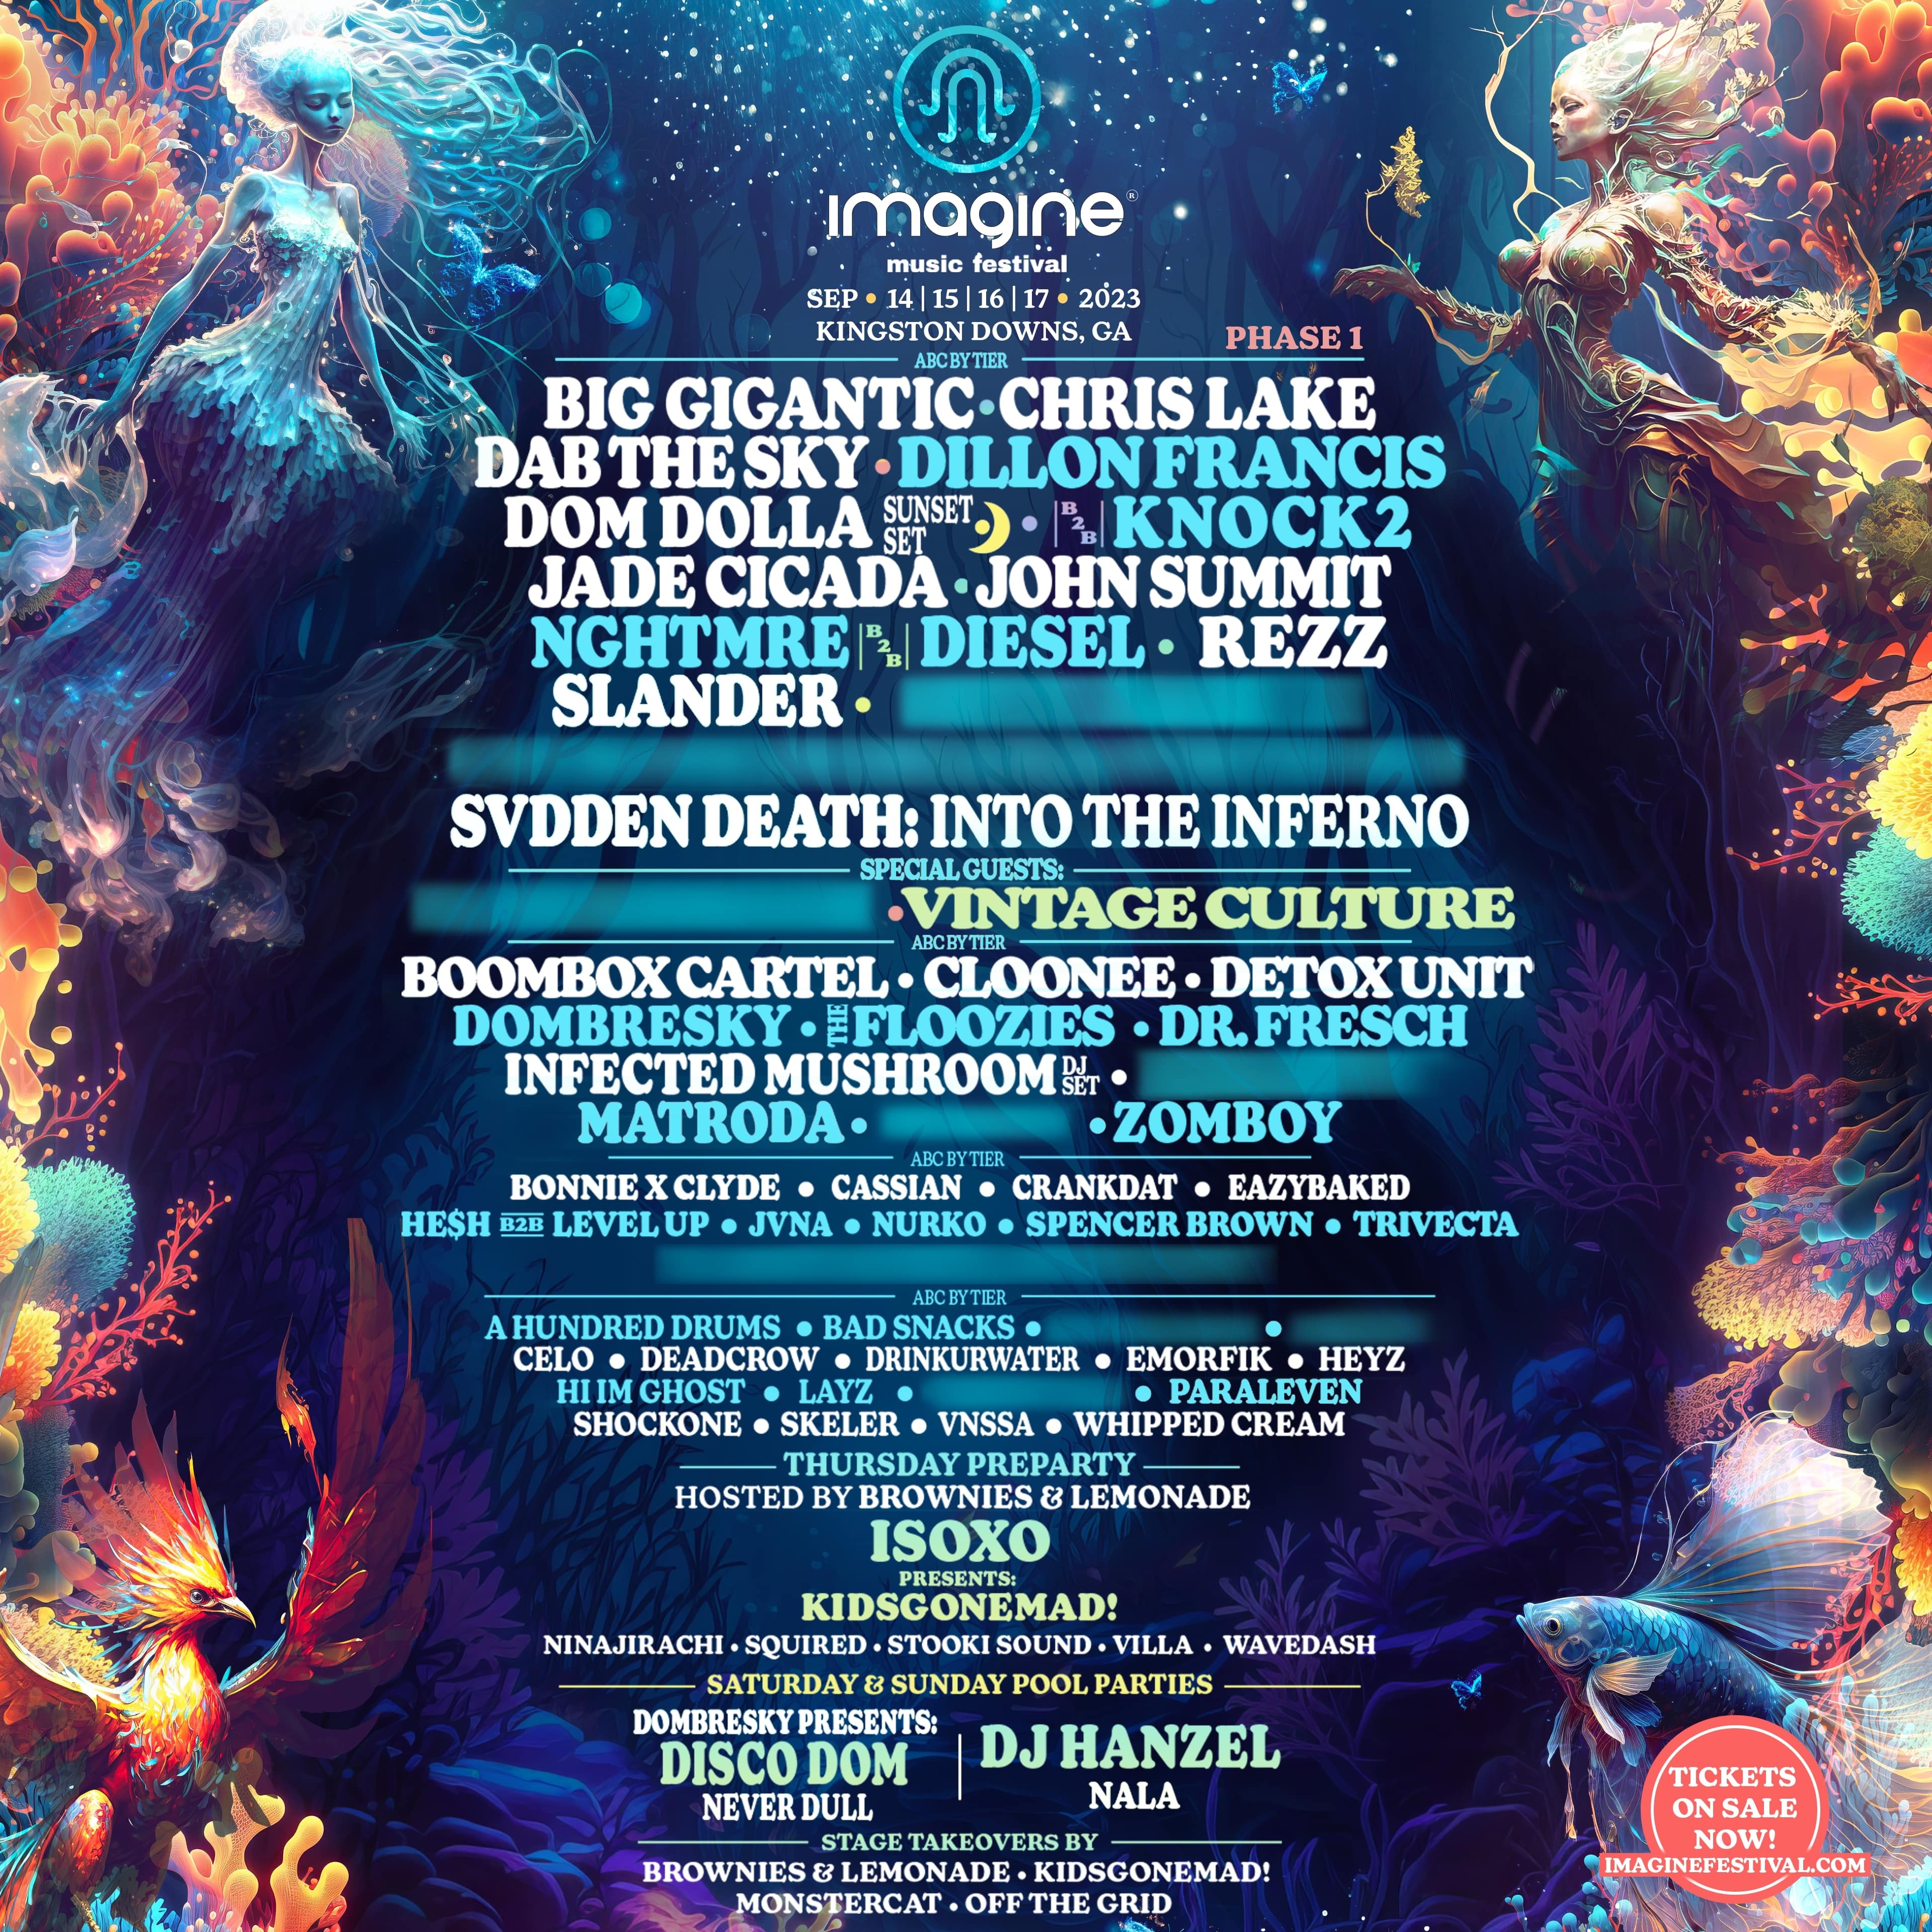 New Electronic Music Festival Afterlife Announces Lineup for May